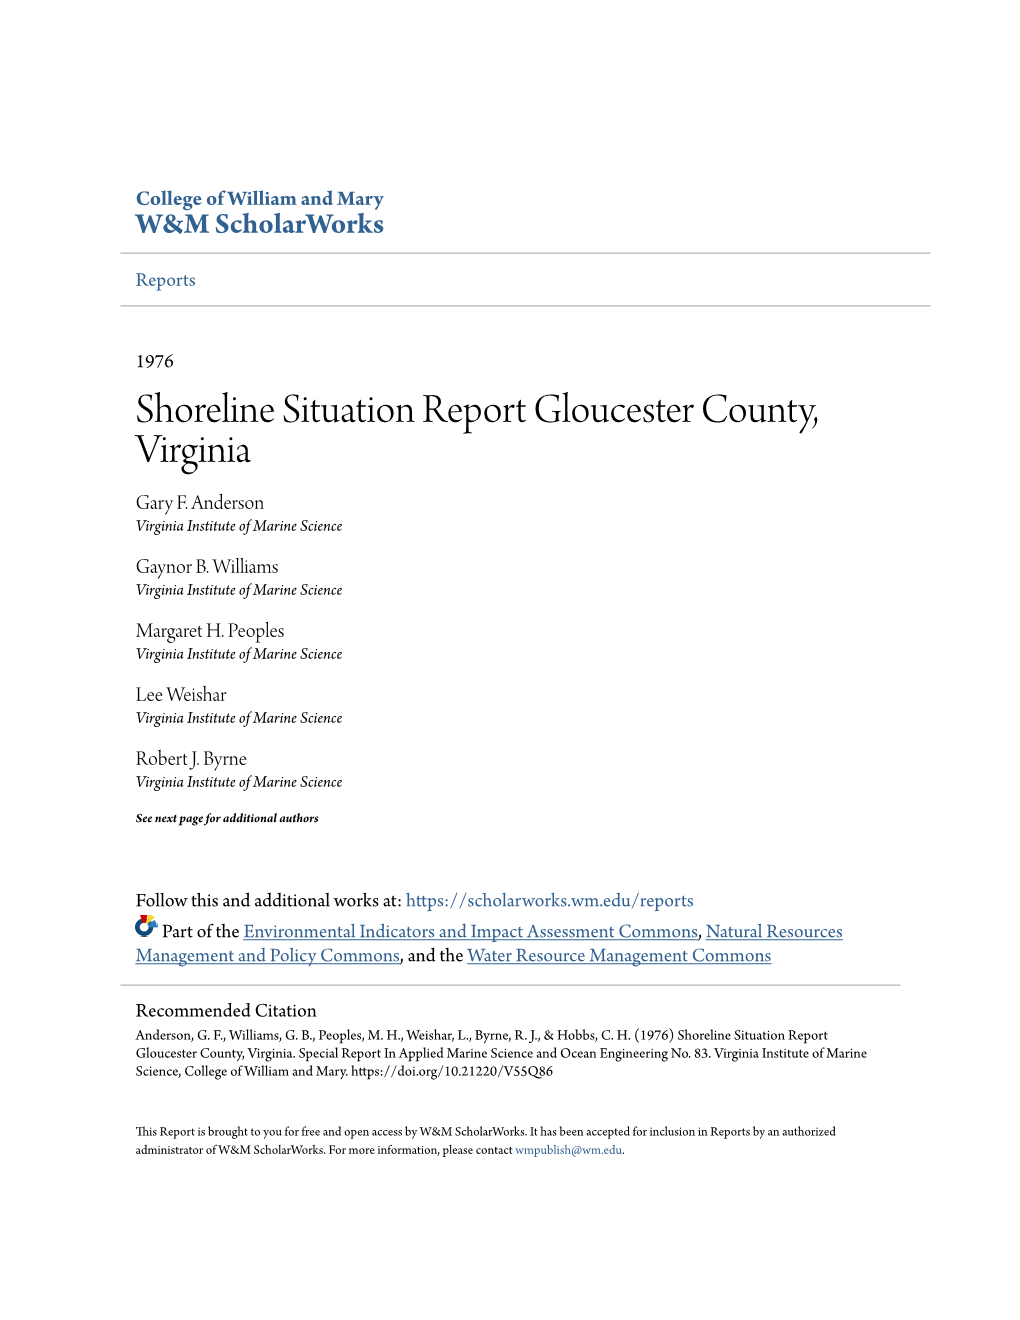 Shoreline Situation Report Gloucester County, Virginia Gary F